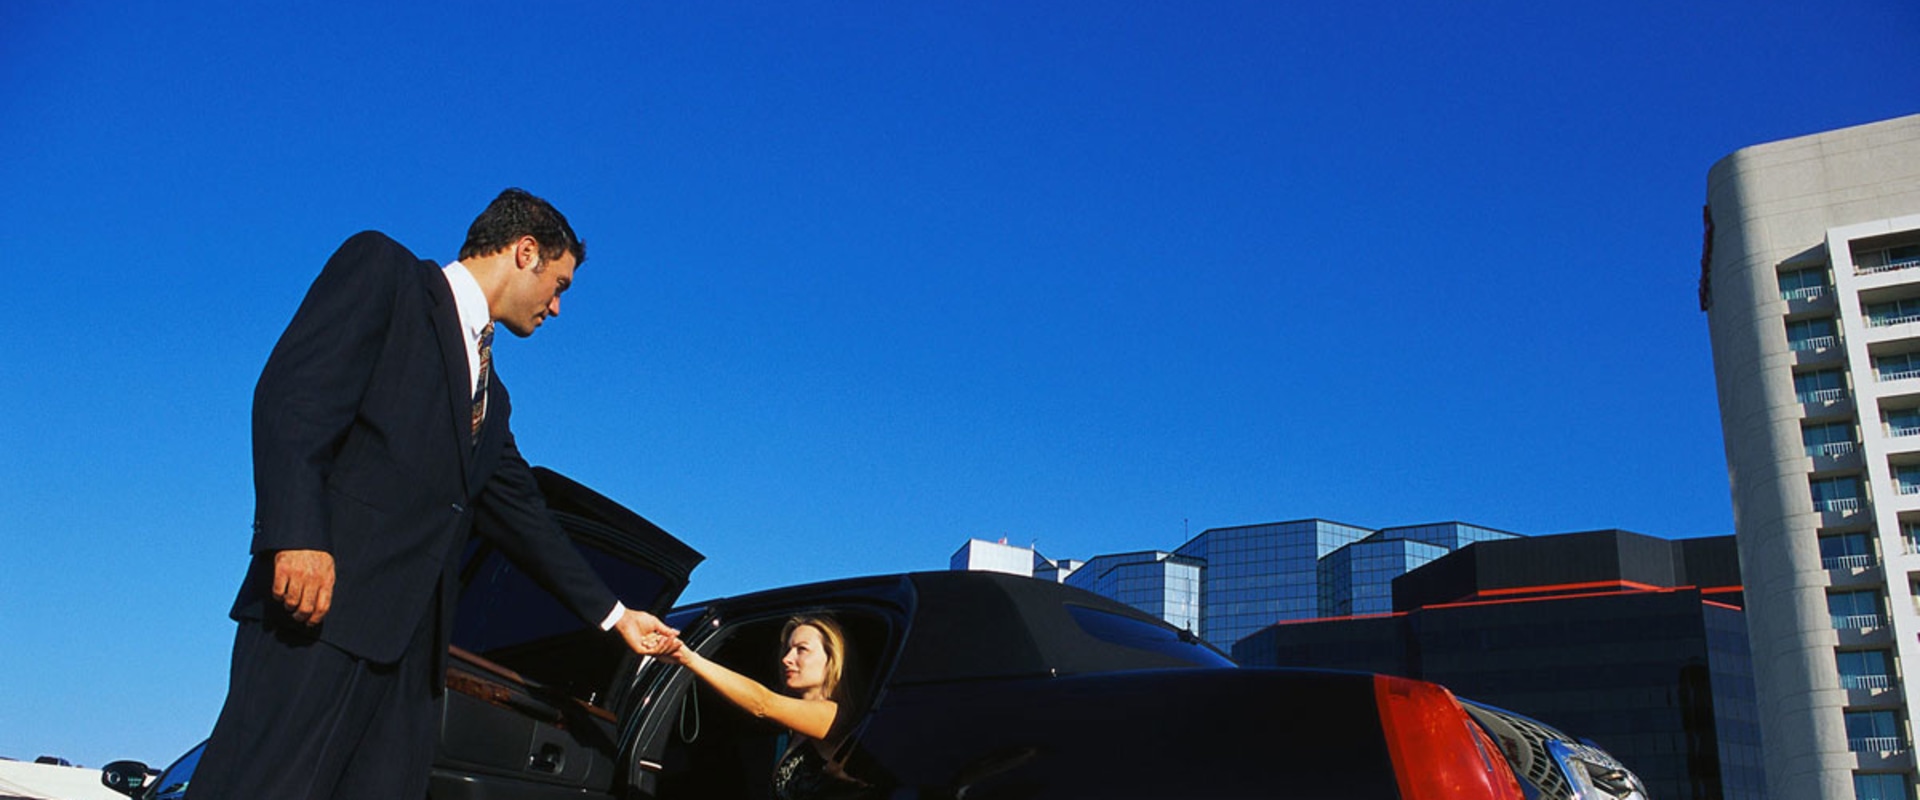 Luxury Travel Agency Limousine Service: Your Gateway To Chicago's Finest